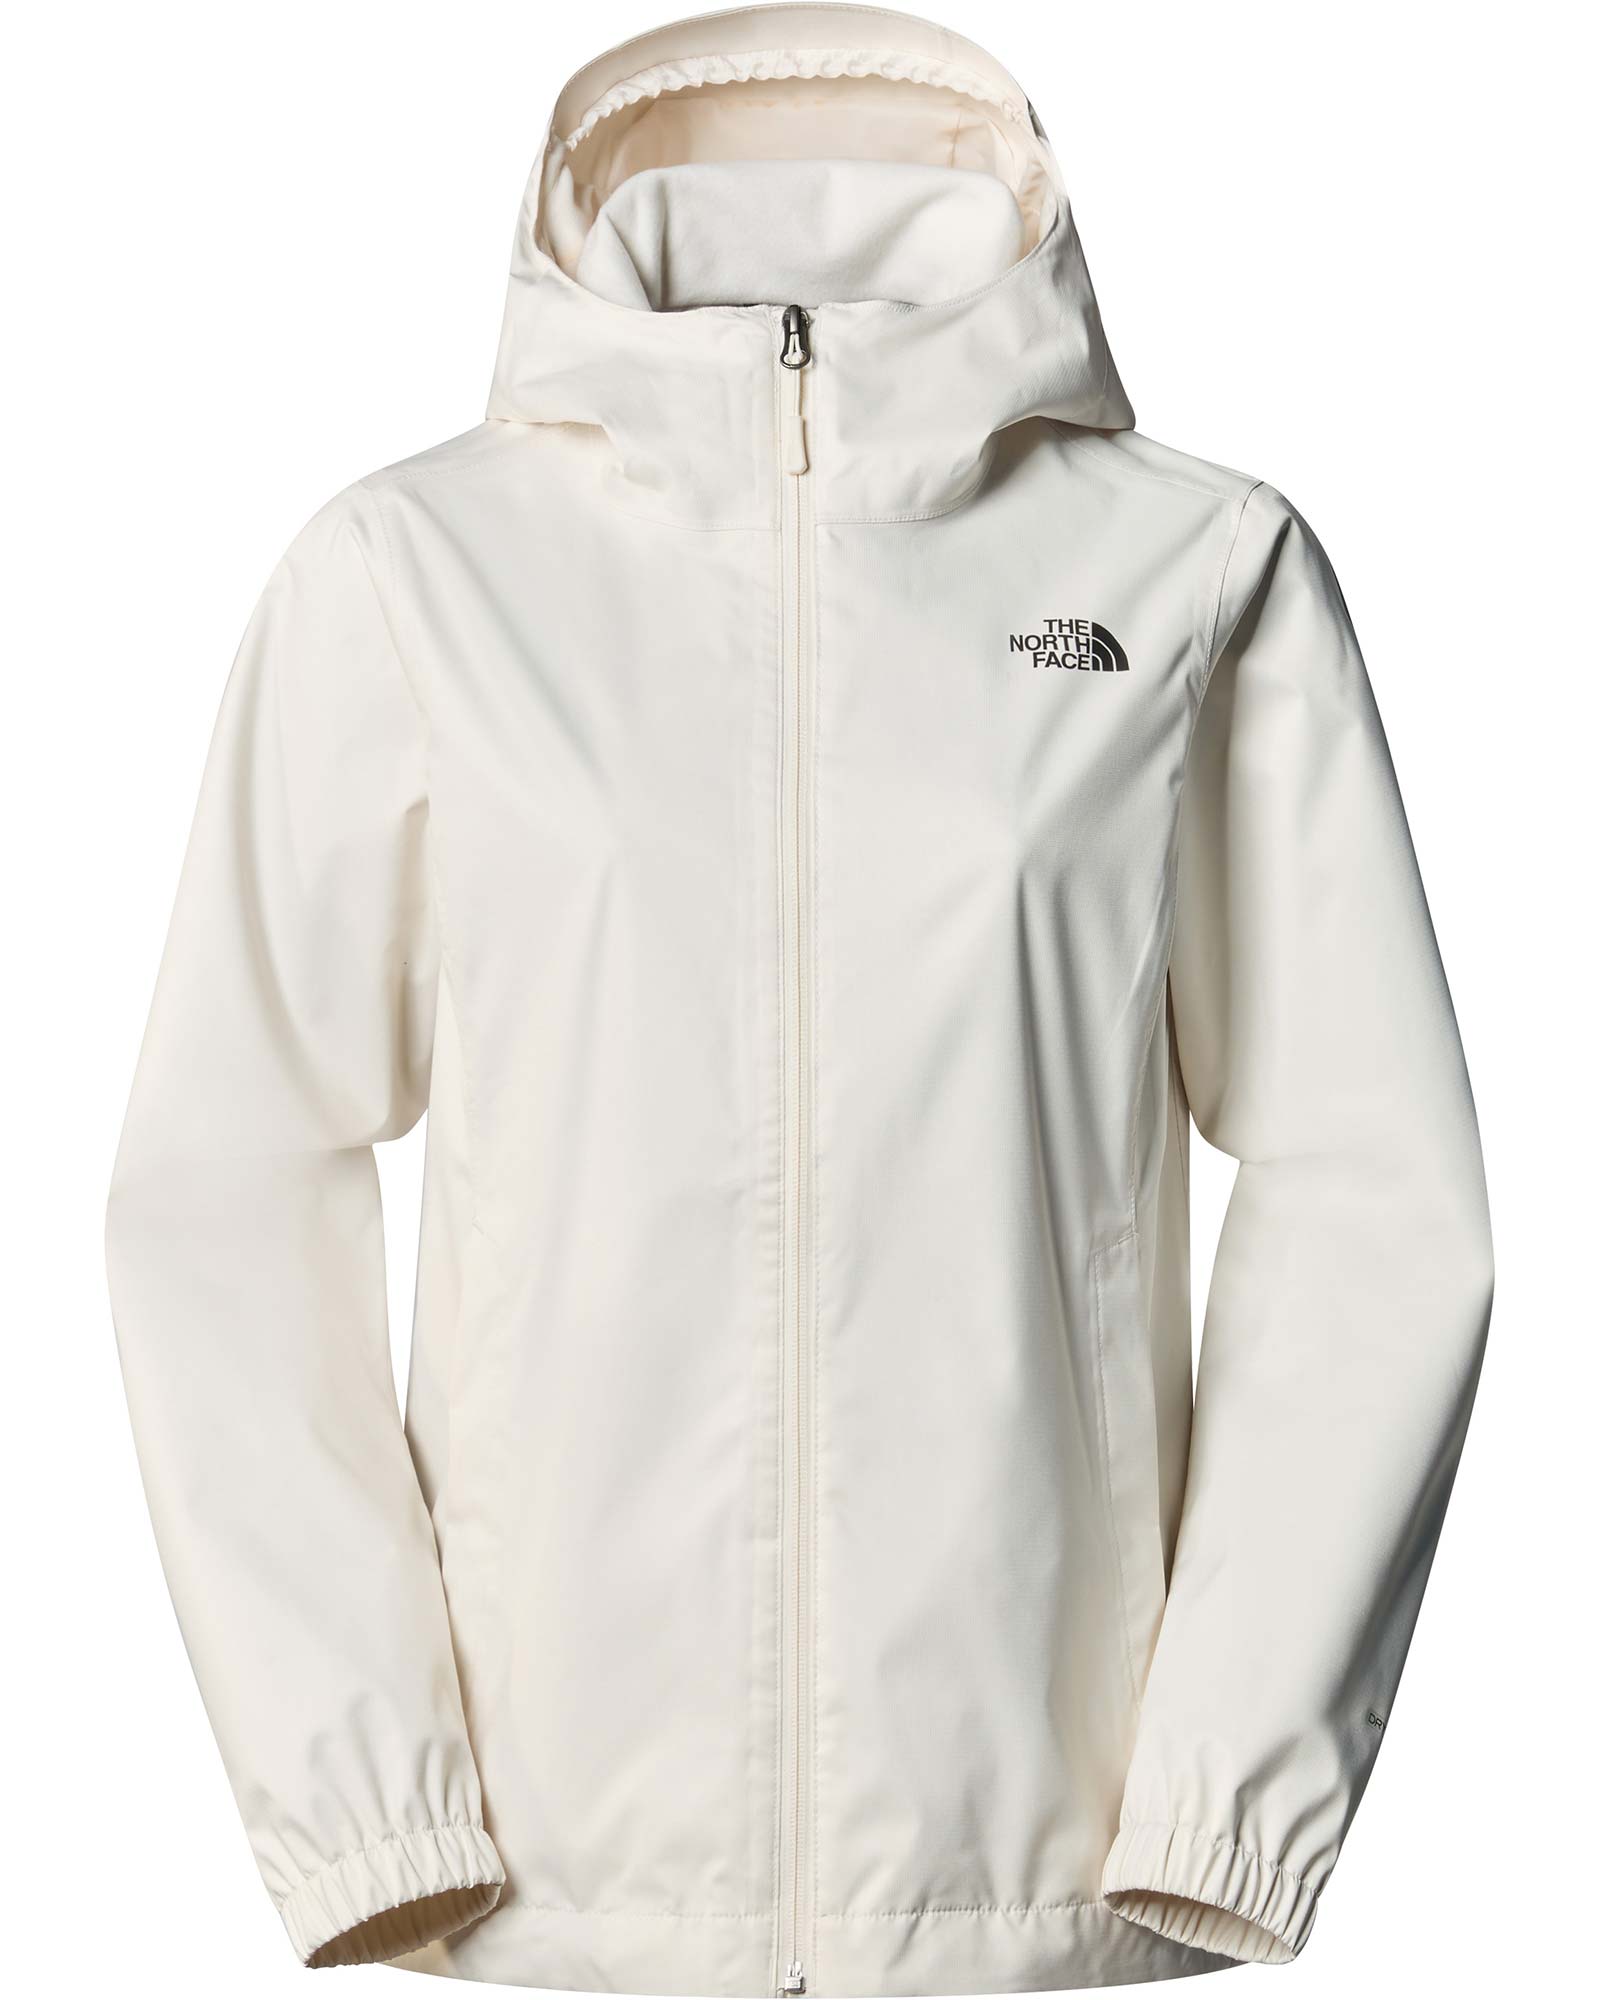 The North Face Women's Quest DryVent Jacket